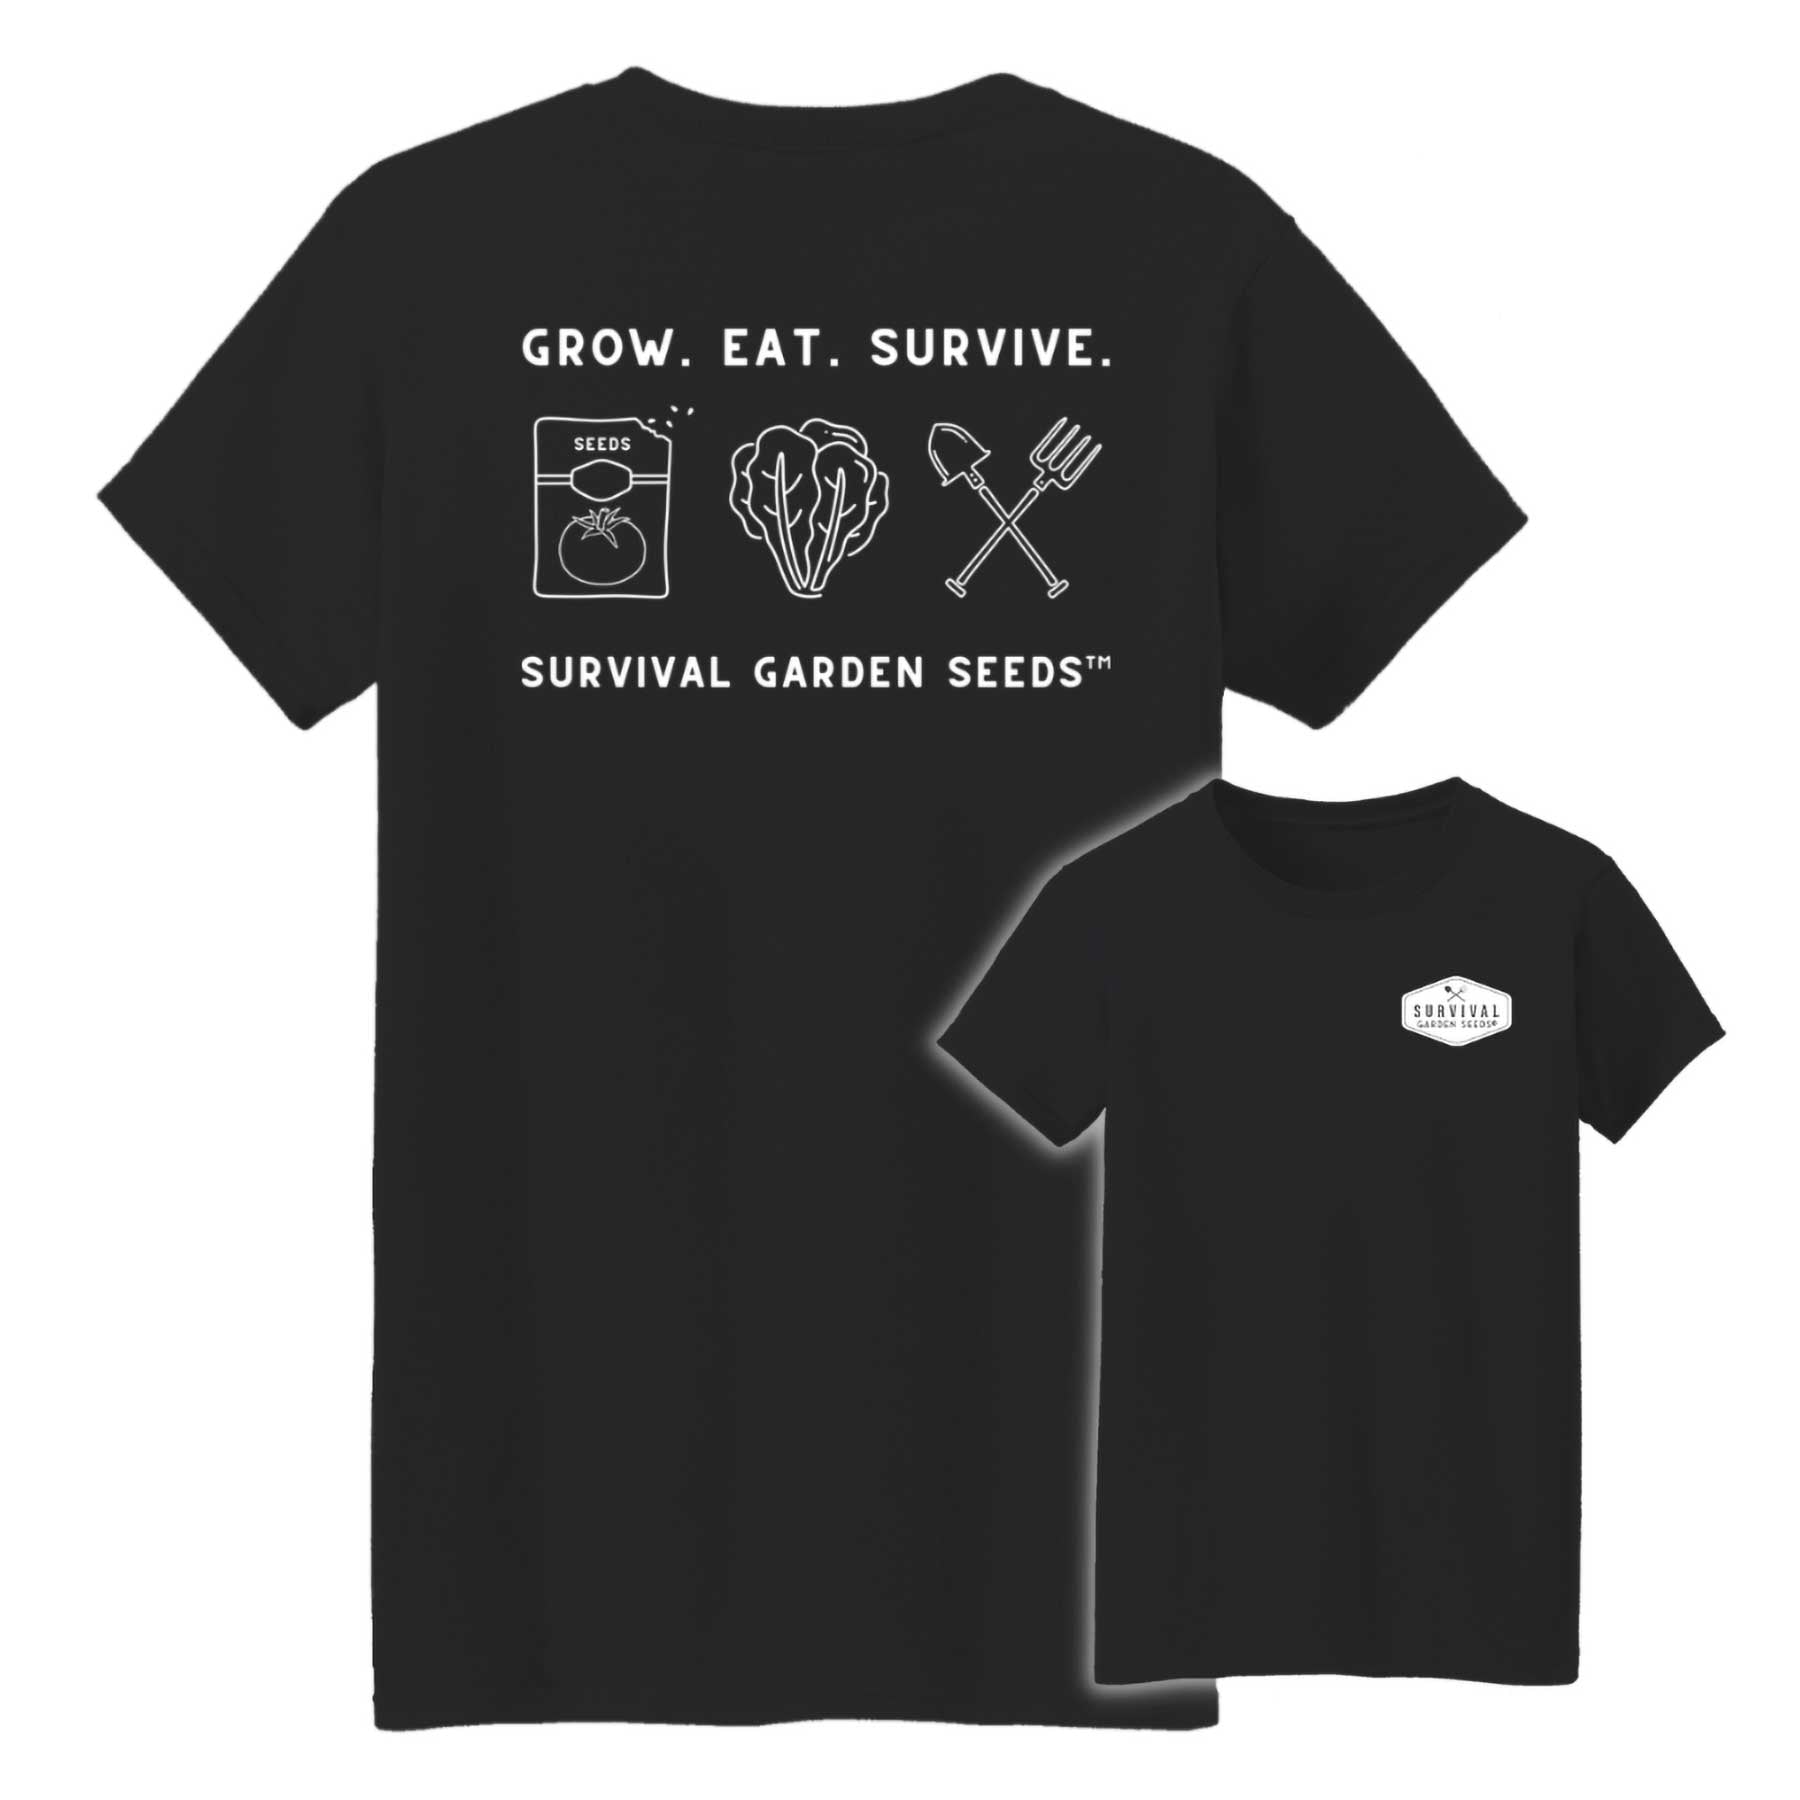 T shirt with Grow. Eat. Survive.